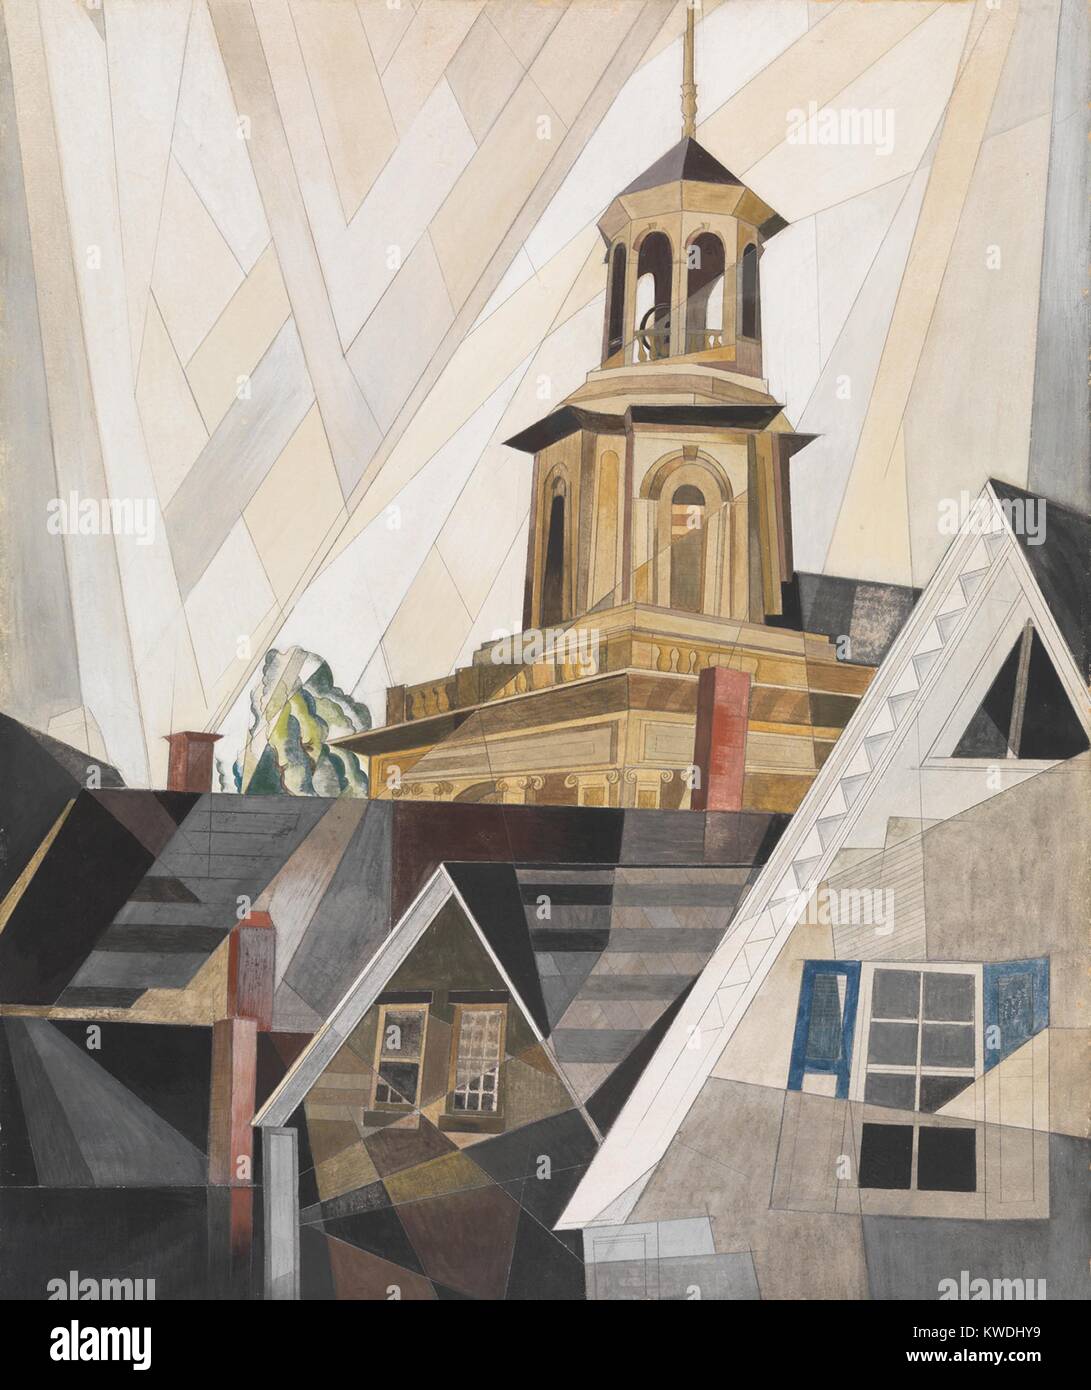 AFTER SIR CHRISTOPHER WREN, by Charles Demuth, 1920, American painting, watercolor, gouache. The old Center Methodist Episcopal Church in Provincetown, Massachusetts, painted with Precisionist ruled lines, geometric forms, and crossing beams of light (BSLOC_2017_7_93) Stock Photo